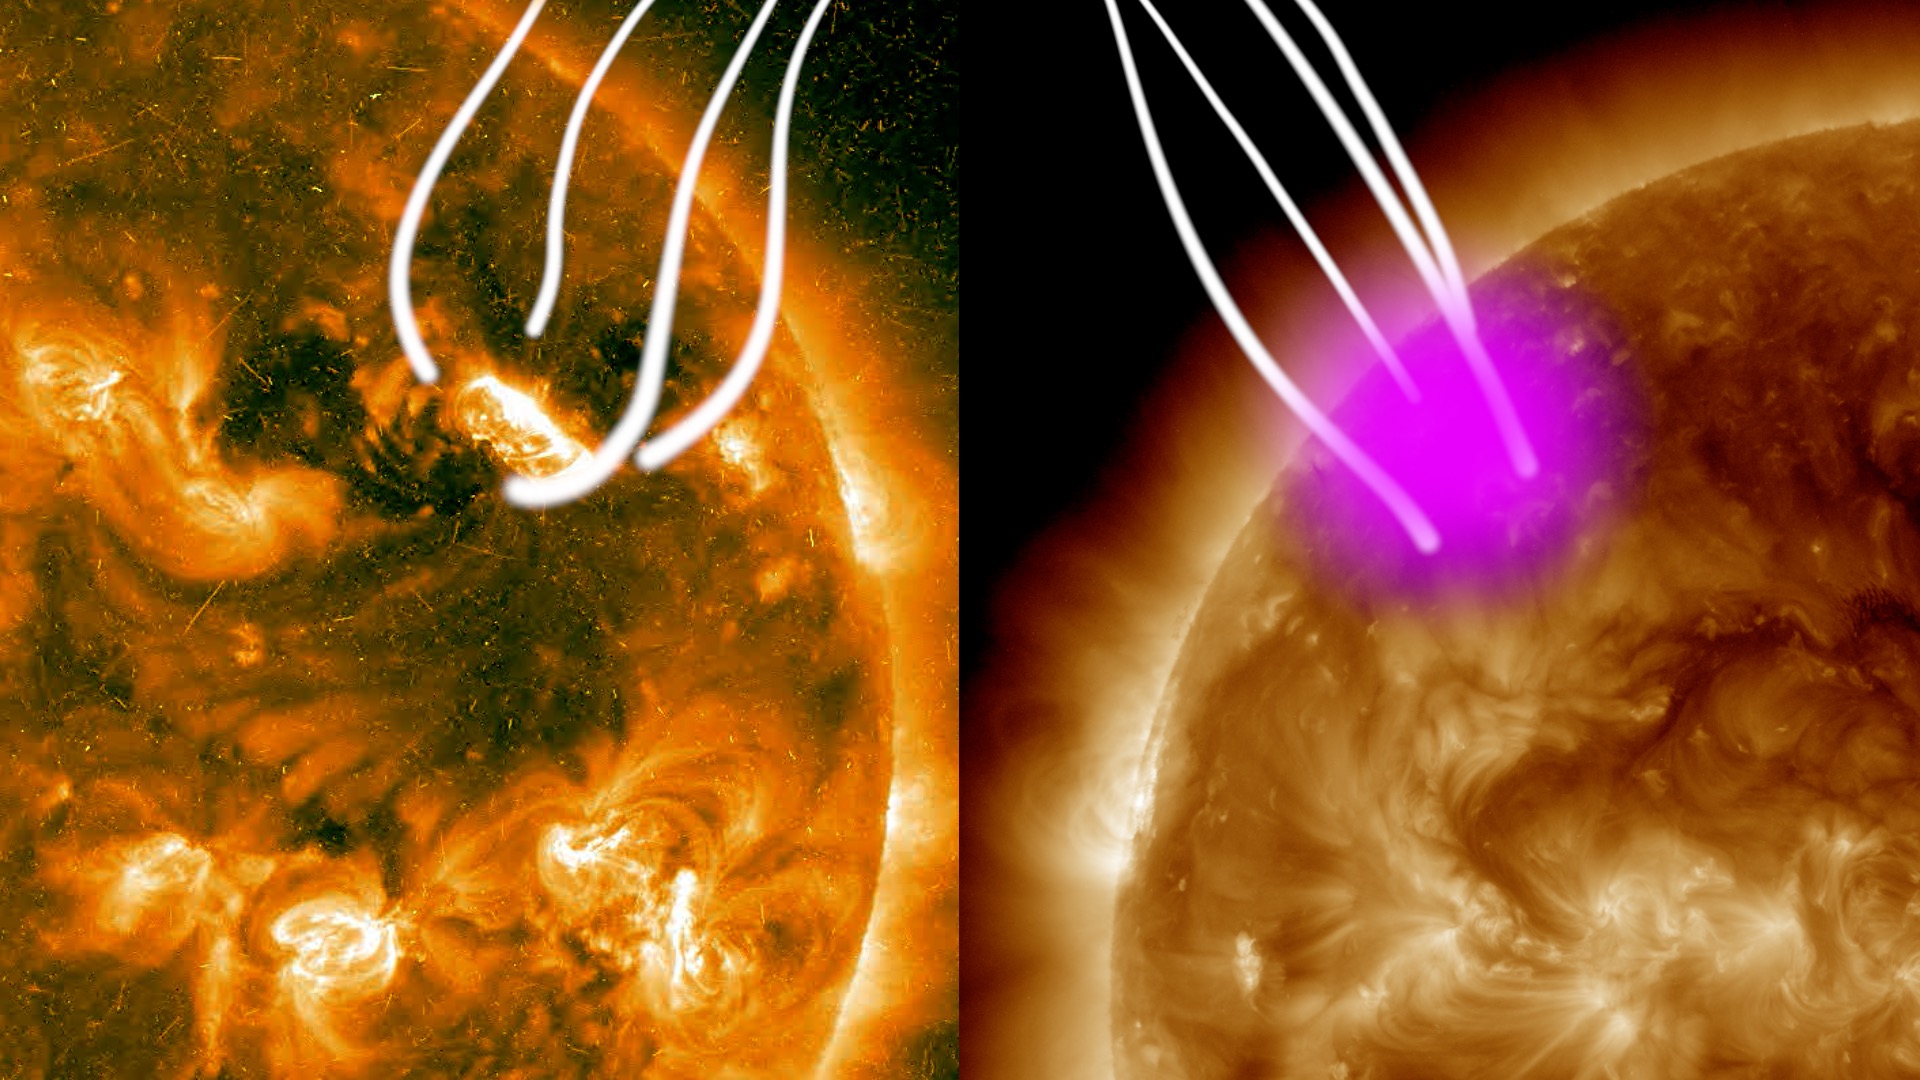 On three occasions, NASA's Fermi Gamma-ray Space Telescope has detected gamma rays from solar storms on the far side of the sun, emission the Earth-orbiting satellite shouldn't be able to detect. Particles accelerated by these eruptions somehow reach around to produce a gamma-ray glow on the side of the sun facing Earth and Fermi. Watch to learn more. Credit: NASA's Goddard Space Flight CenterWatch this video on the NASA Goddard YouTube channel.Complete transcript available.This illustration shows large magnetic structures extending high above the sun from the active region hosting the Sept. 1, 2014, solar blast. Left: Scientists think particles accelerated at the leading edge of the event's coronal mass ejection followed magnetic lines high above the sun. Right: Some of the particles followed similar magnetic structures rooted in the Earth-facing side of the sun. They rained down on the sun and interacted with the solar surface, producing gamma rays (magenta). The solar images shown here come from (left) STEREO B and (right) NASA's Solar Dynamics Observatory.  Credit: NASA/STEREO and NASA/SDO